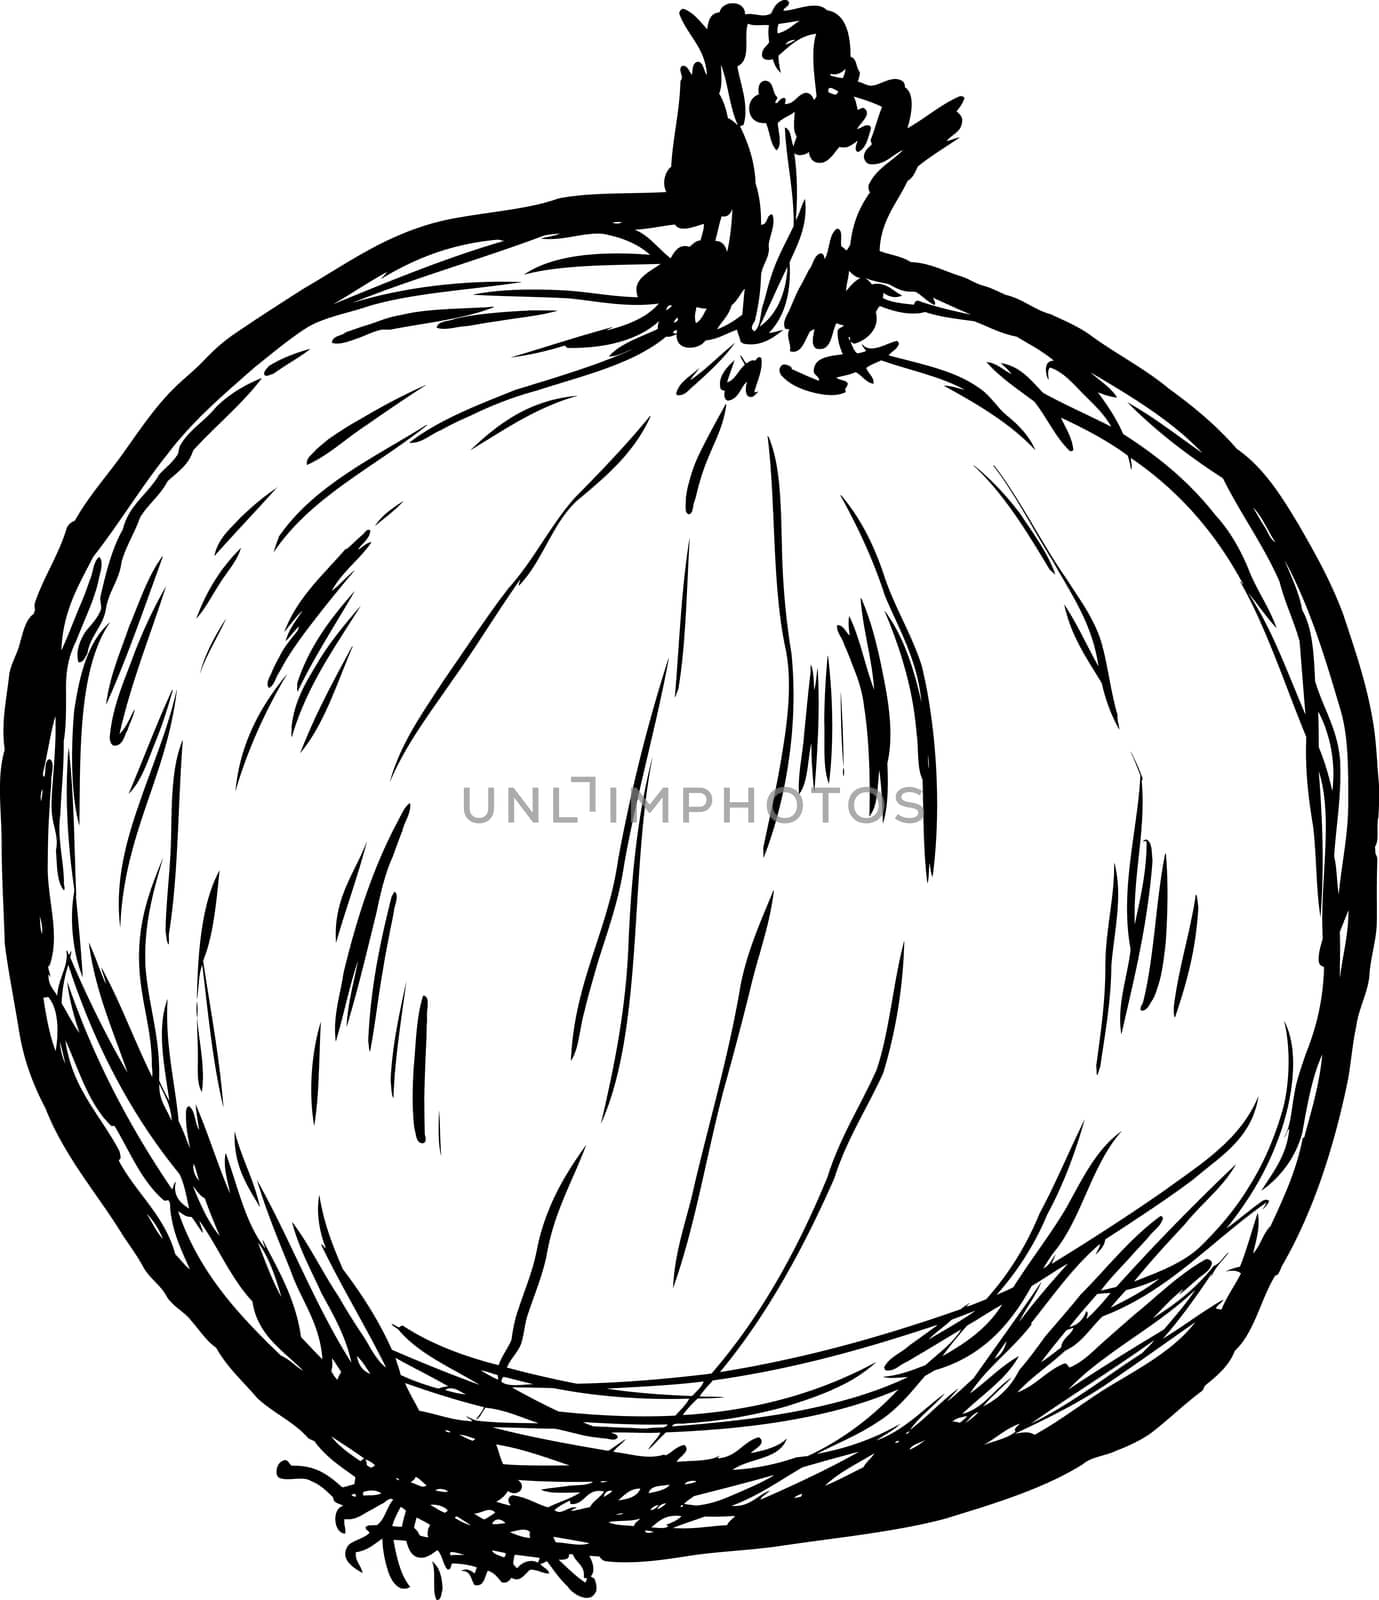 Whole onion sketch outline by TheBlackRhino